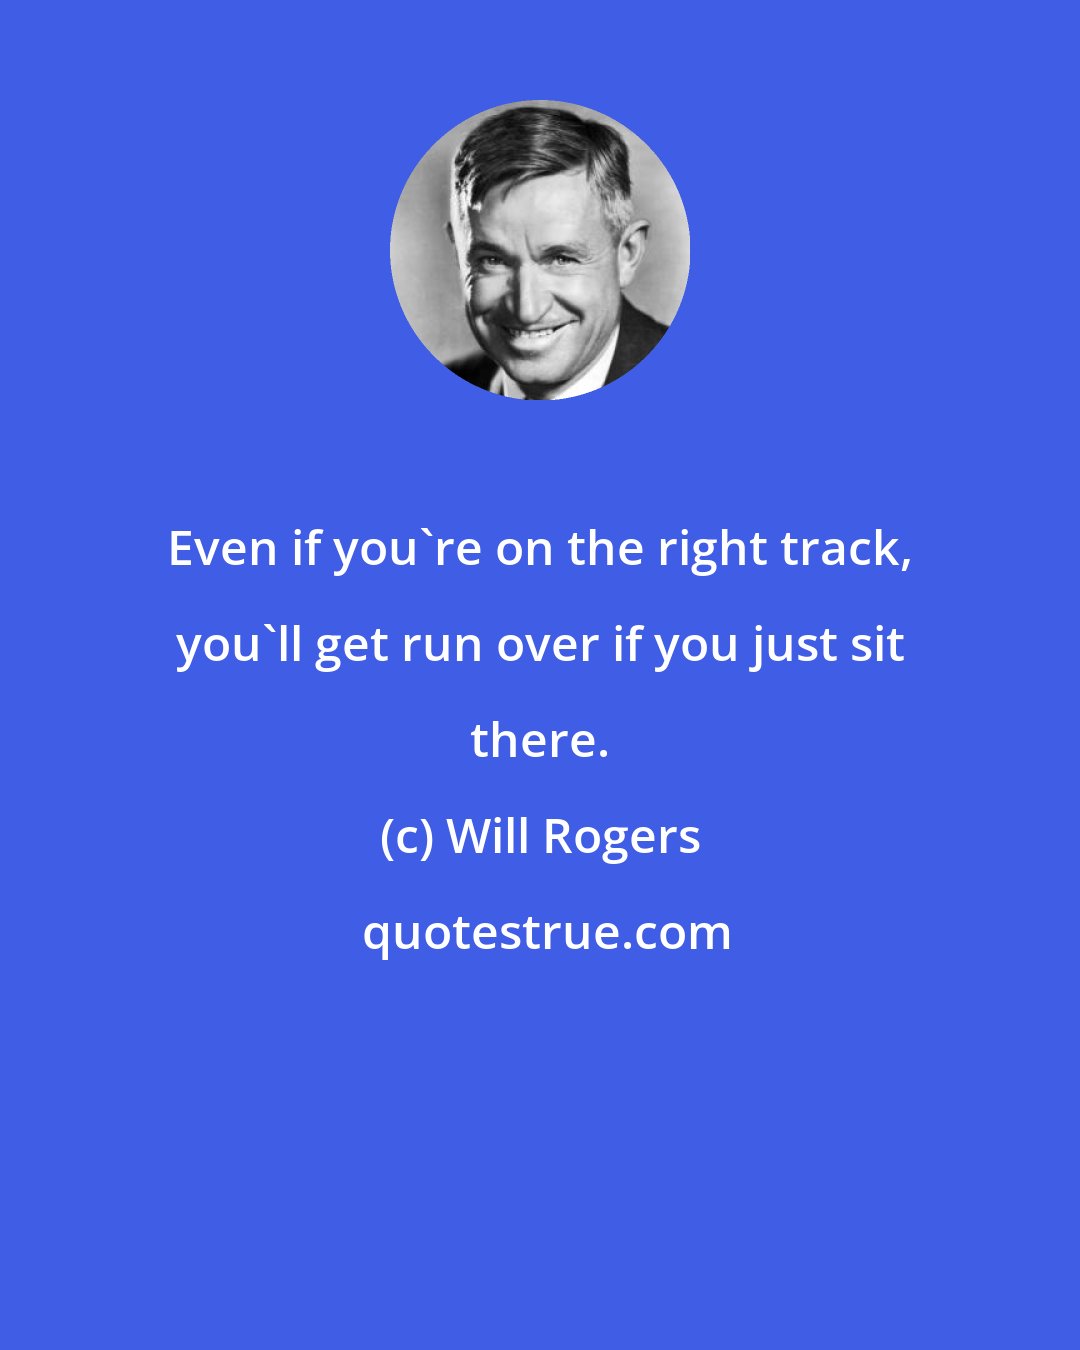 Will Rogers: Even if you're on the right track, you'll get run over if you just sit there.